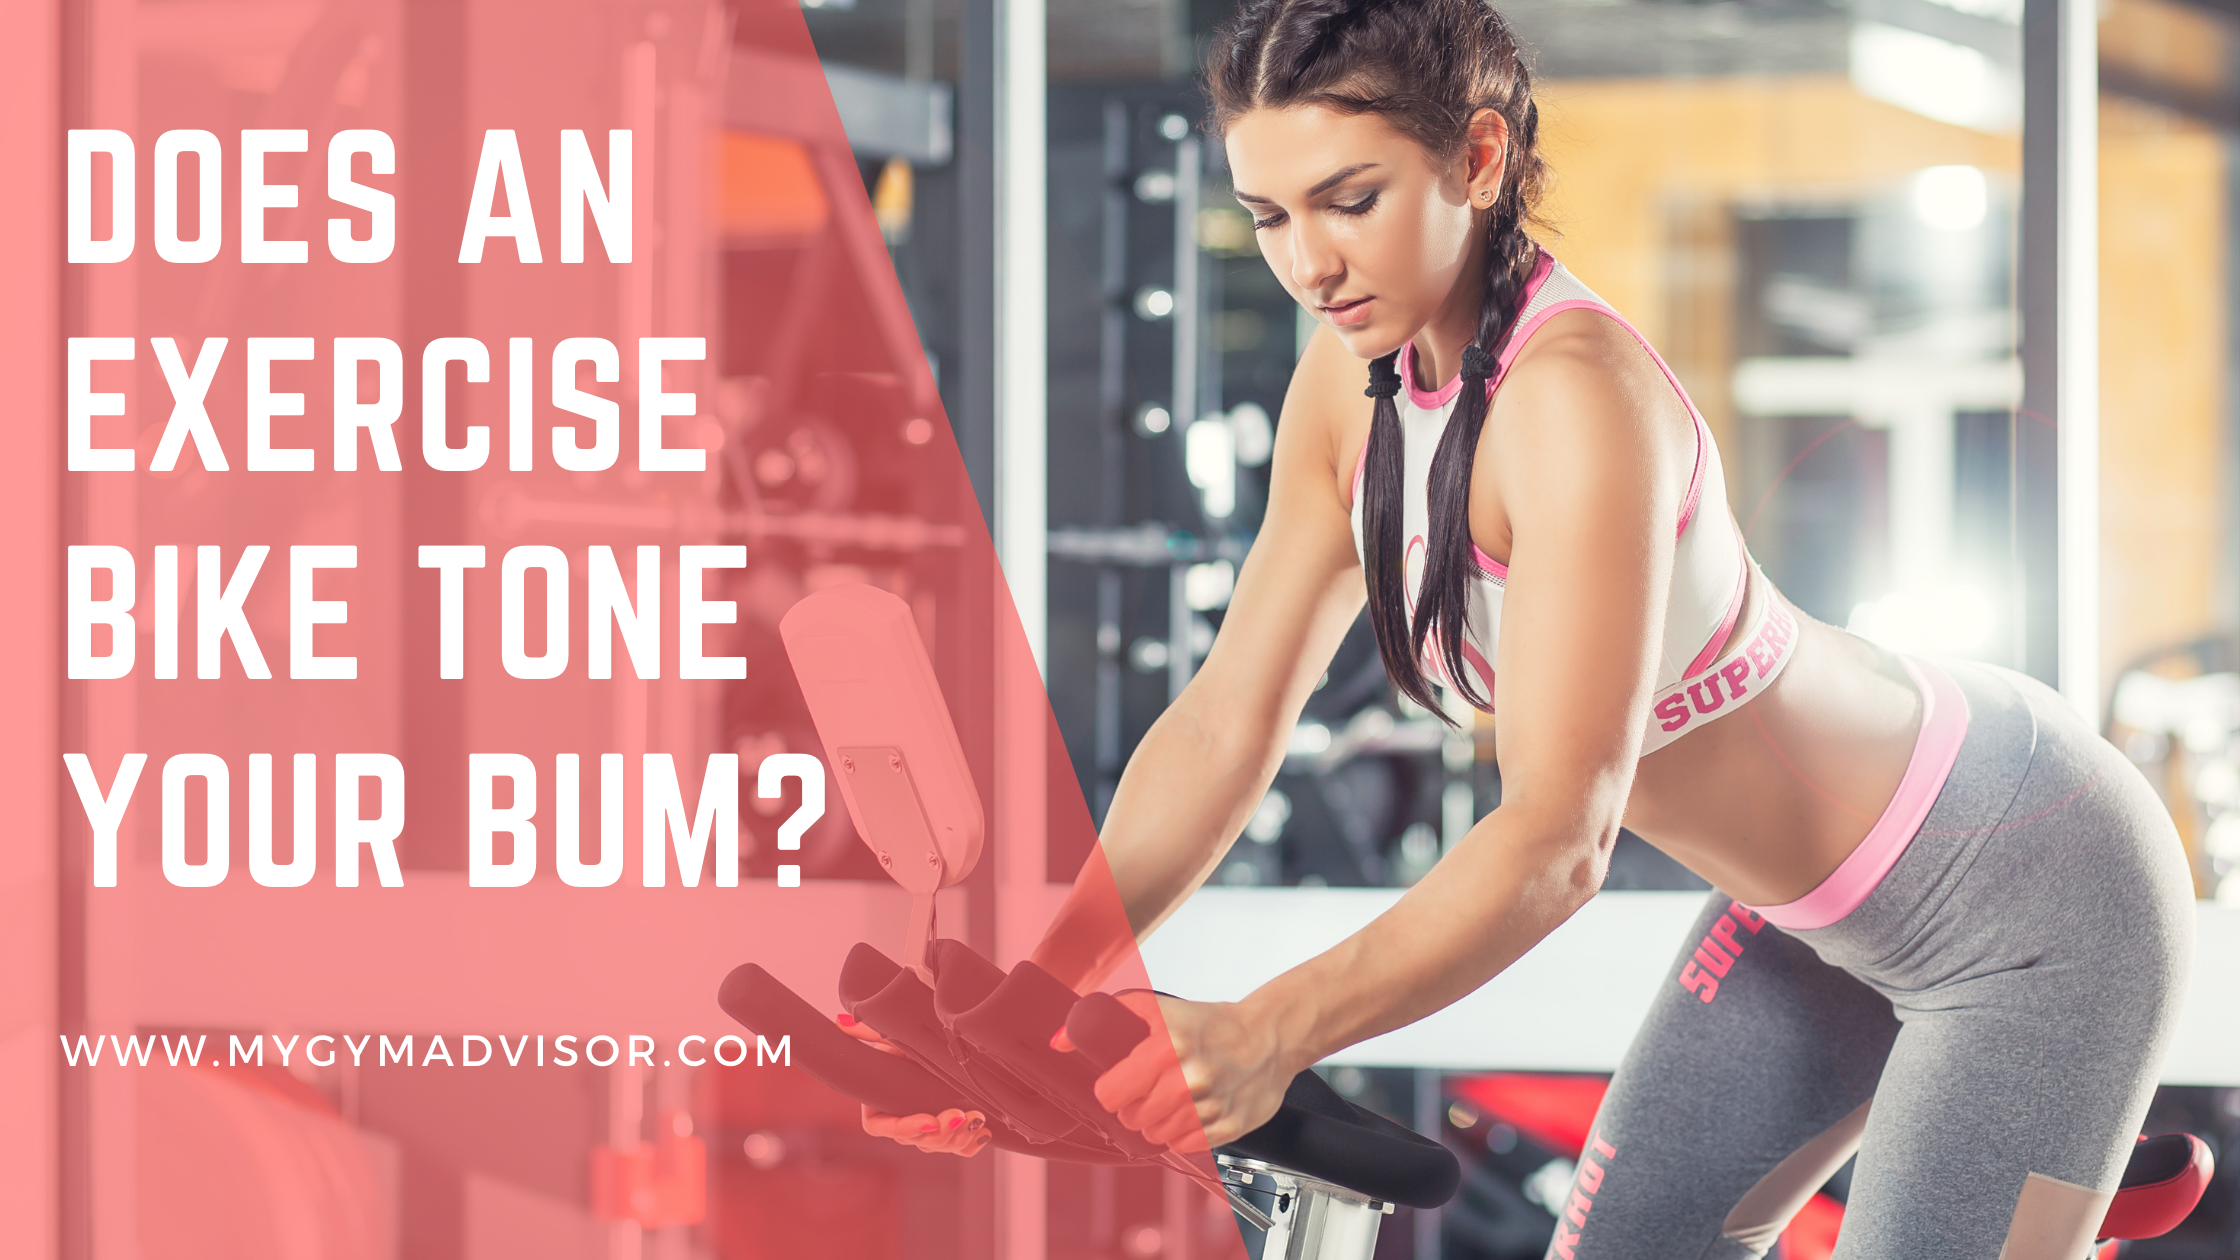 Does an exercise bike tone your bum?